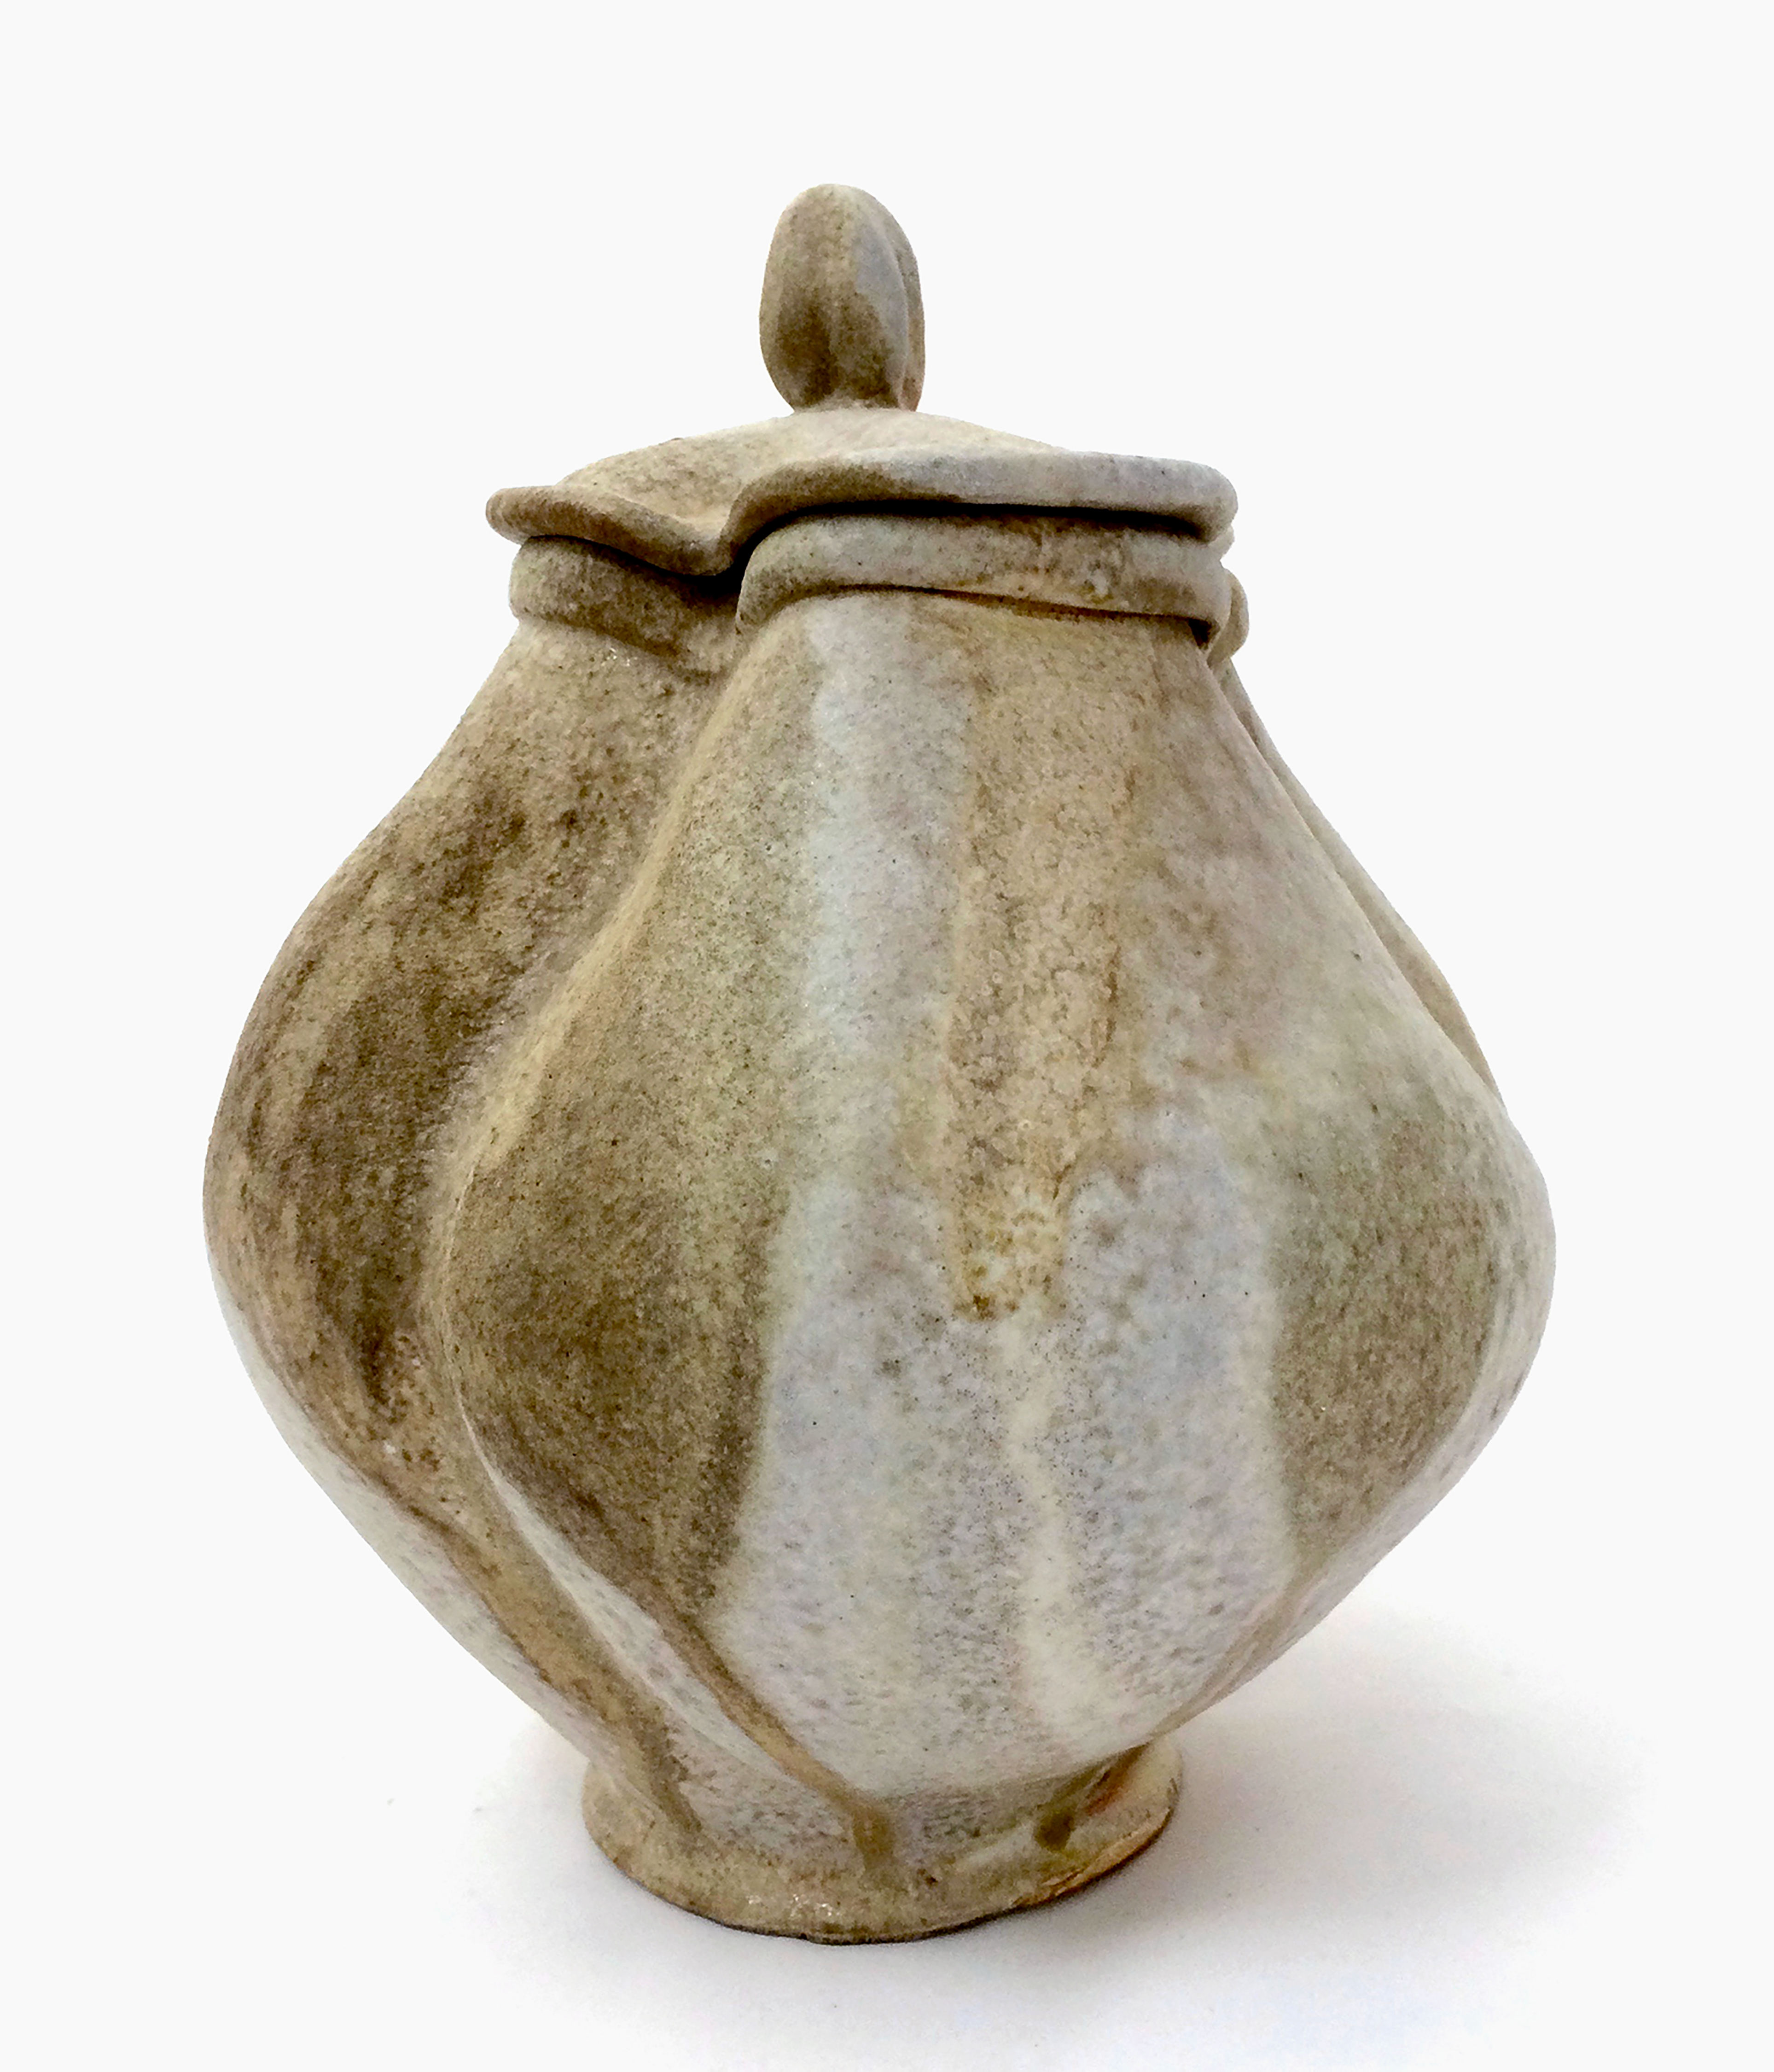 Hannah Meredith. Lavender Lidded Jar, 2015. Wood-fired white stoneware, Cone 12. 12 x 10 in. Photo by artist.